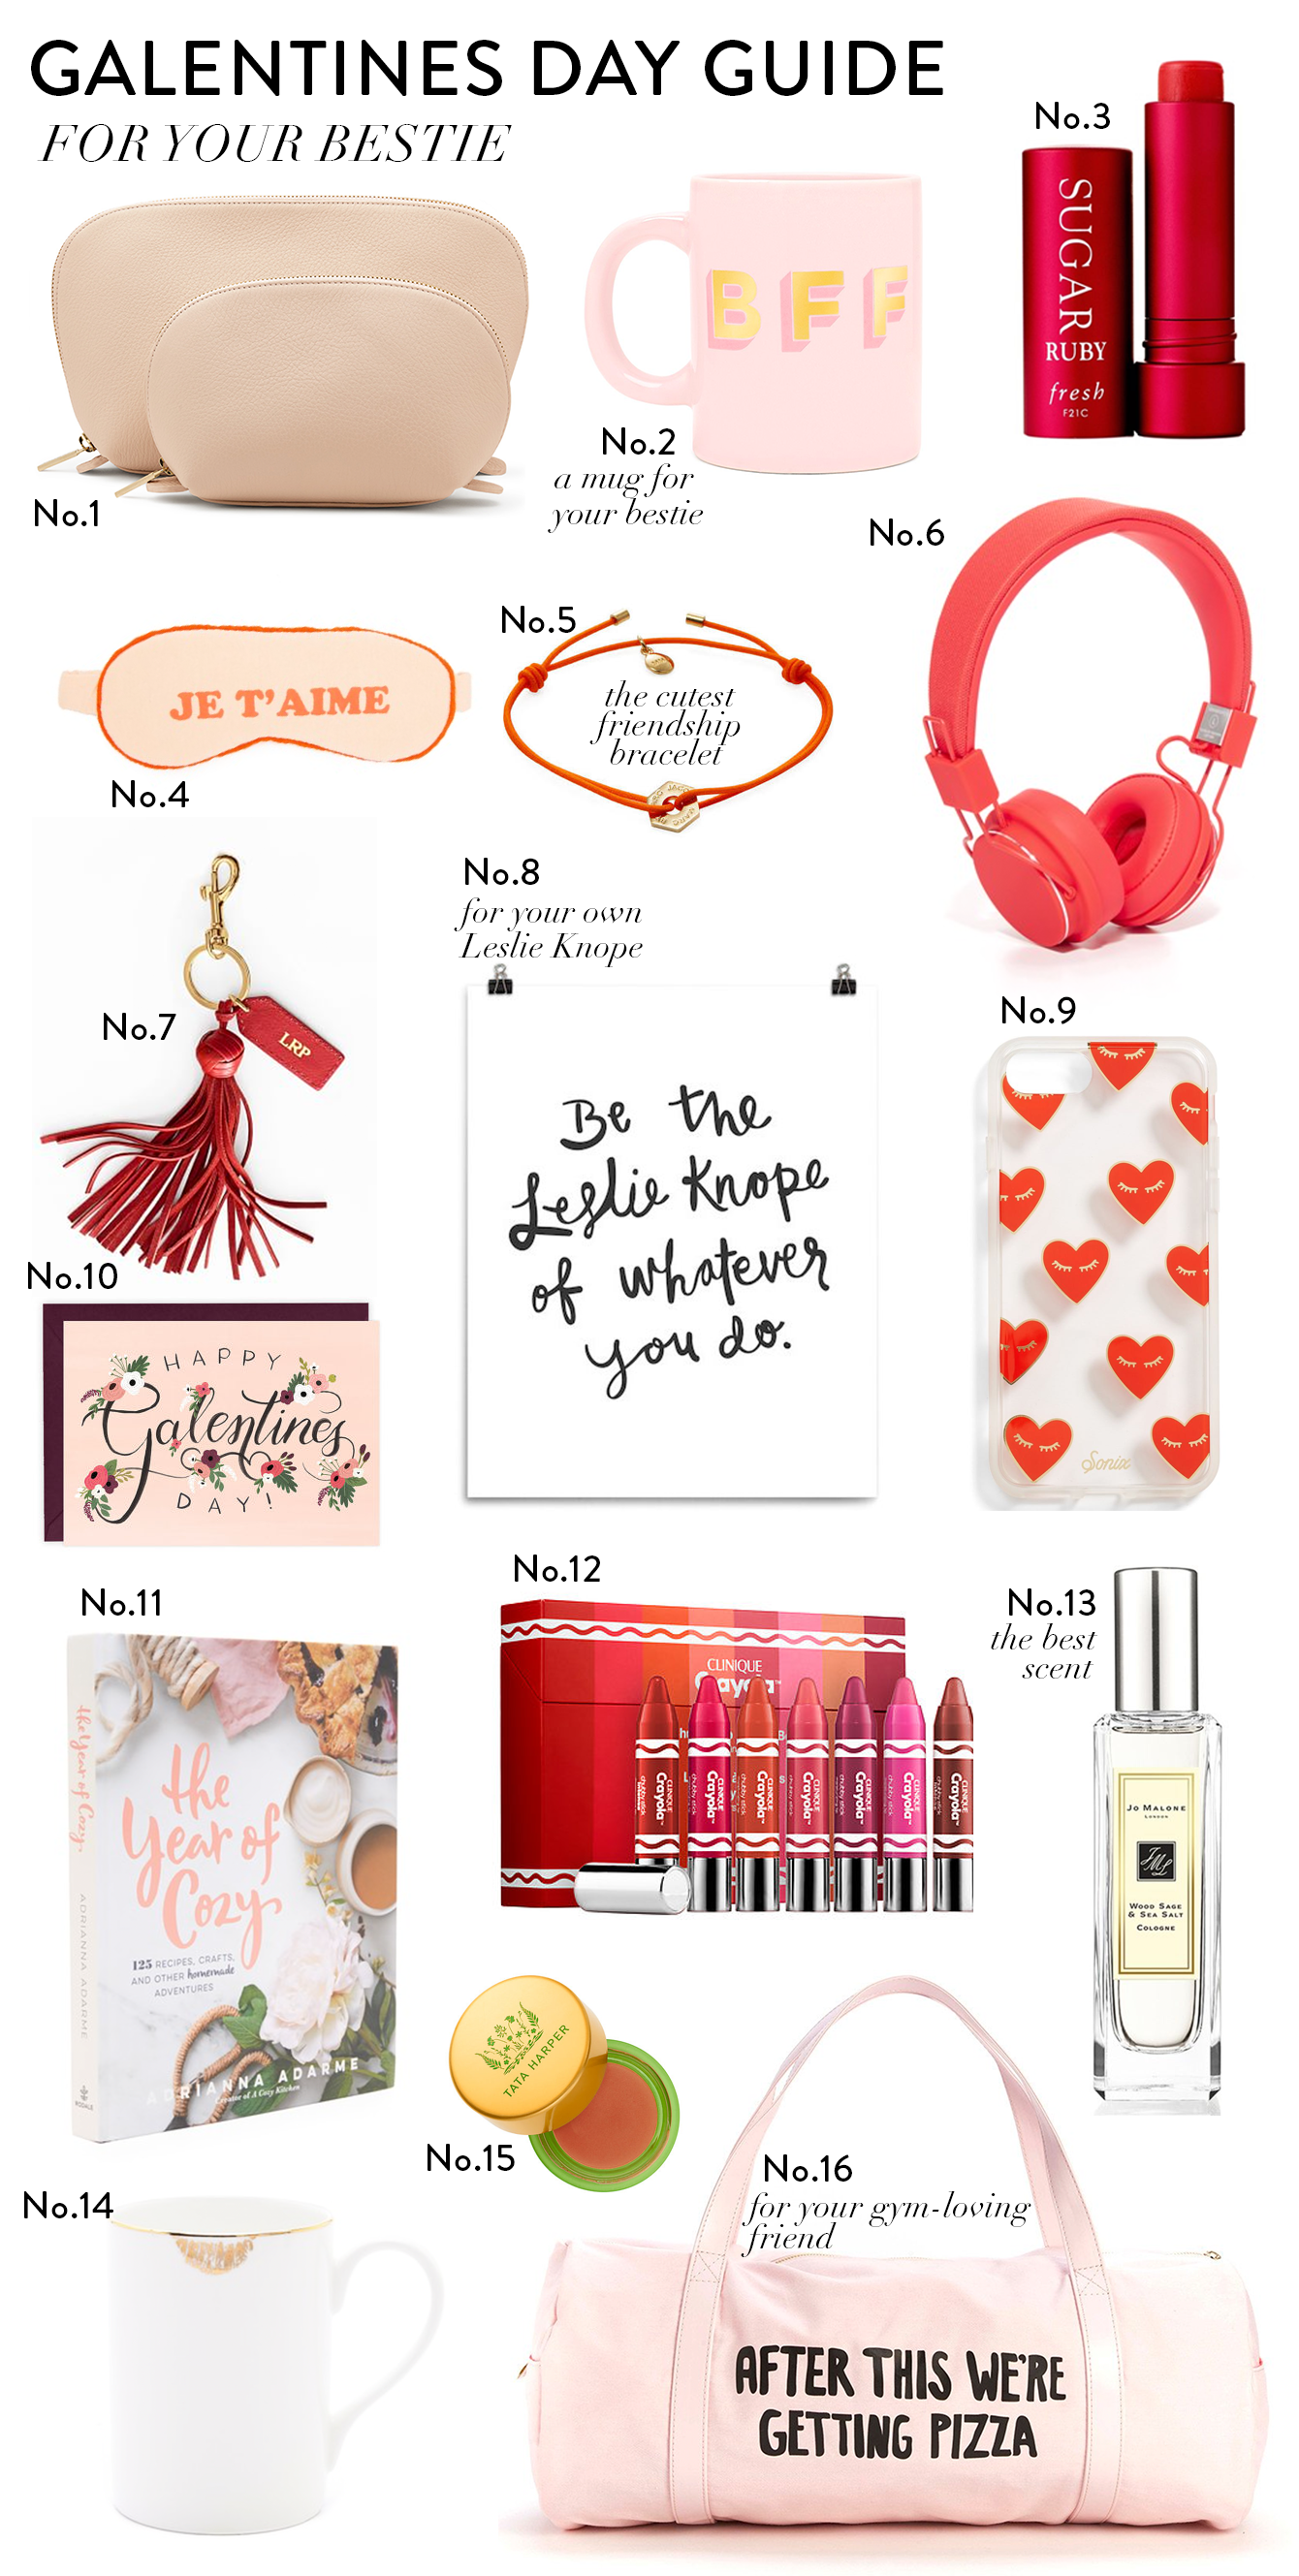 Galentine's Day Gift Guide | Charmingly Styled1340 x 2658